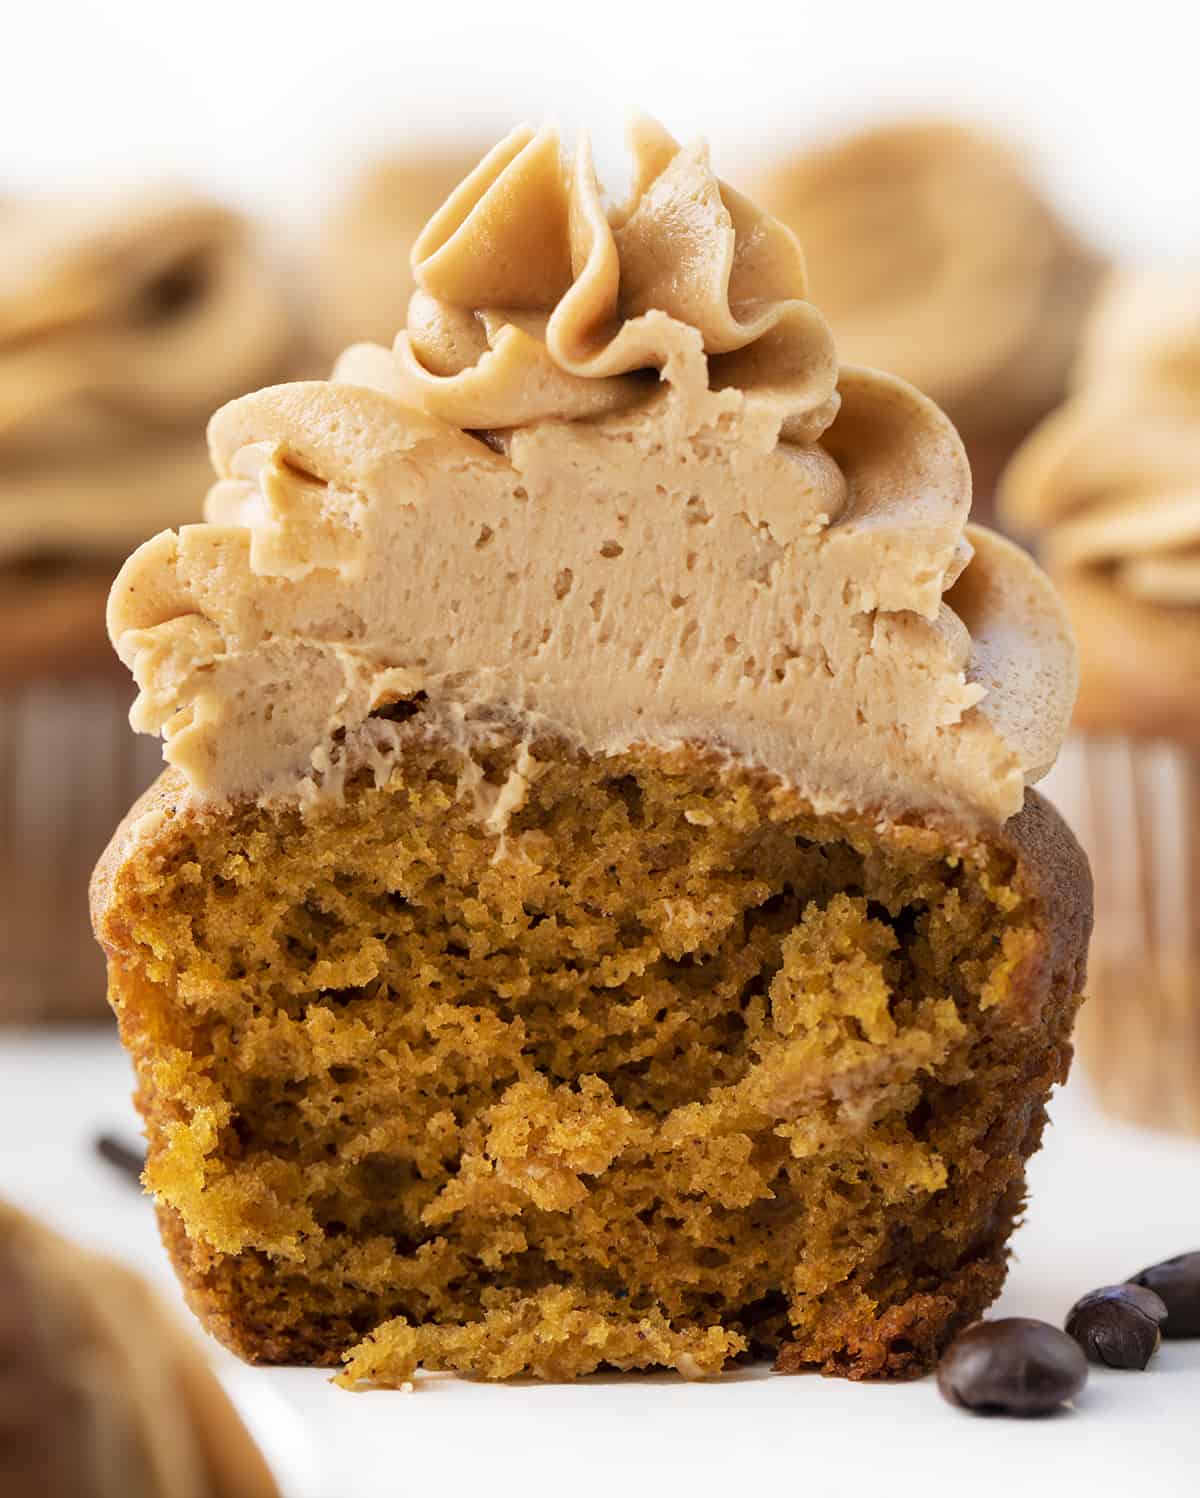 Cut into Pumpkin Spice Latte Cupcake Showing Tender Crumb. Cupcakes, Baking, Decorated Cupcakes, Frosted Cupcakes, Pumpkin Spice Cupcakes, Coffee Frosting, Dessert, Holiday Desserts, Christmas Dessert, Thanksgiving Desserts, Thanksgiving Cupcakes, Starbucks Cupcakes, i am baker, iambaker